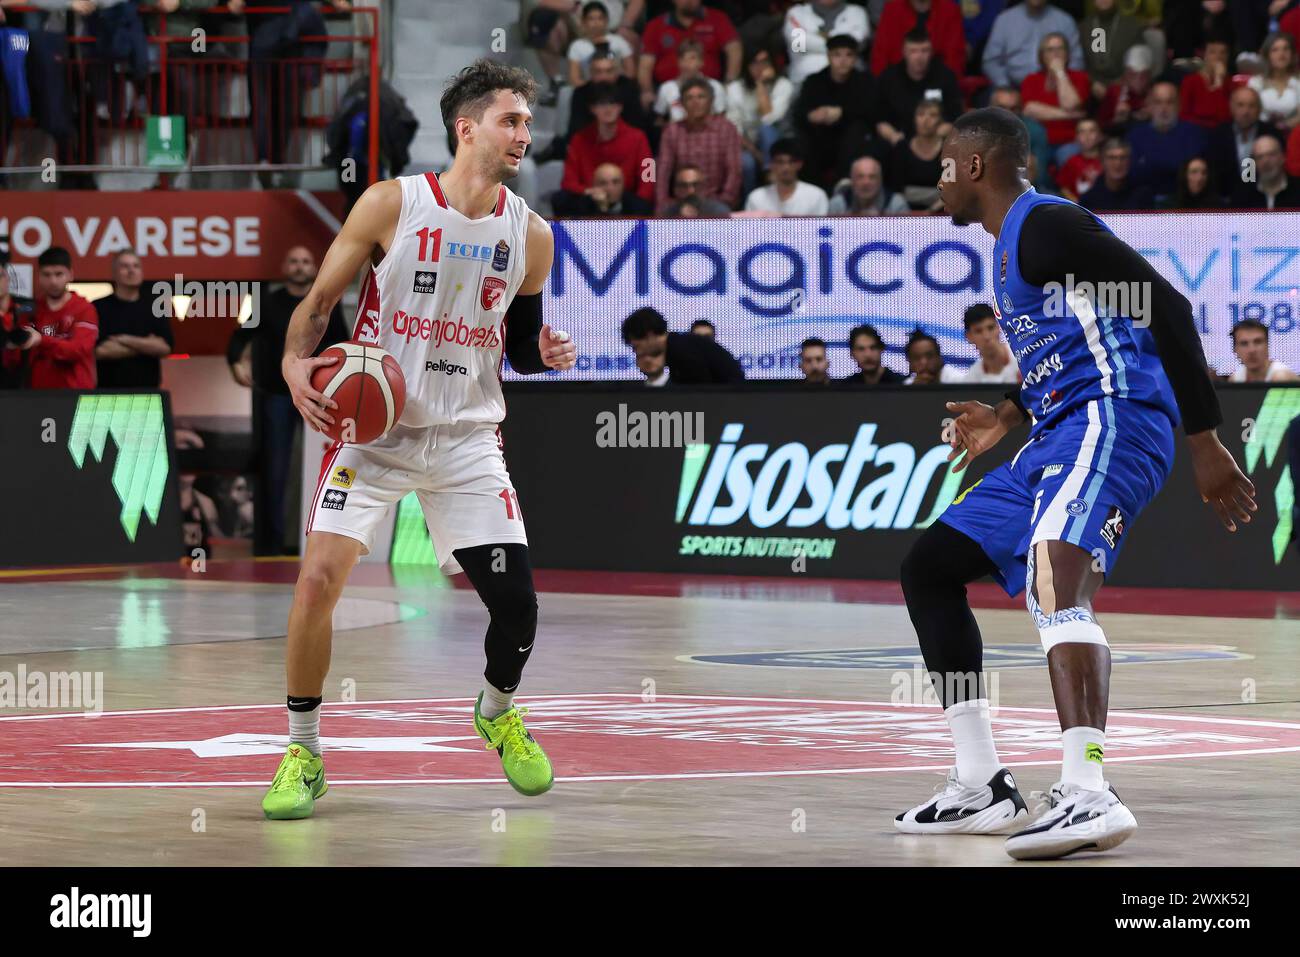 Varese, Italy. 30th Mar, 2024. Italy, Varese, march 30 2024: Davide Moretti (Varese) dribbles in front court in the 4th quarter during basketball game OpenJobMetis Varese vs Germani Brescia, LBA 2023-2024 day 25OpenJobMetis Varese vs Germani Brescia - Lega Basket Serie A day 25 at Itelyum Arena on march 30 2024 (Photo by Fabrizio Andrea Bertani/Pacific Press) Credit: Pacific Press Media Production Corp./Alamy Live News Stock Photo